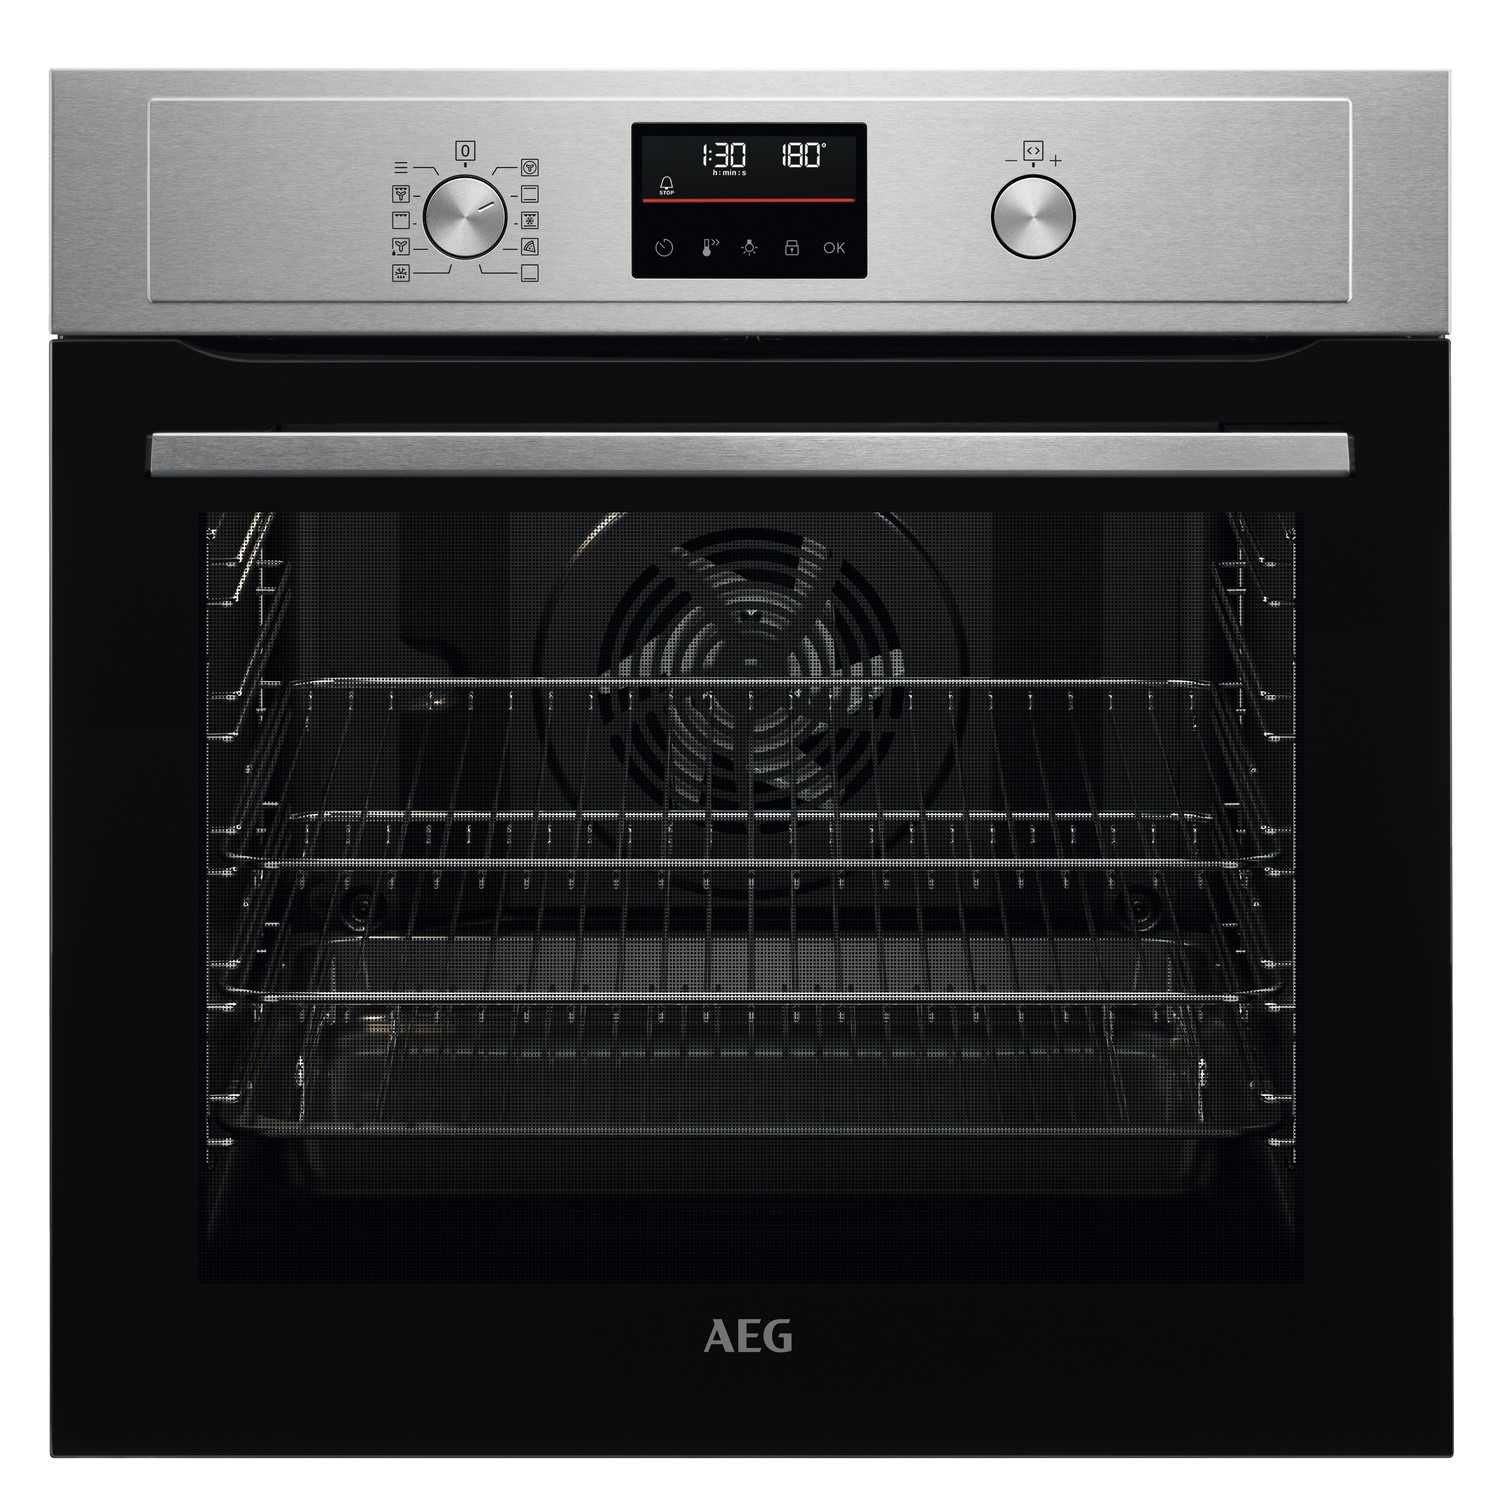 Photos - Other for Computer AEG Series 6000 Electric Single Oven - Stainless Steel 949498305 